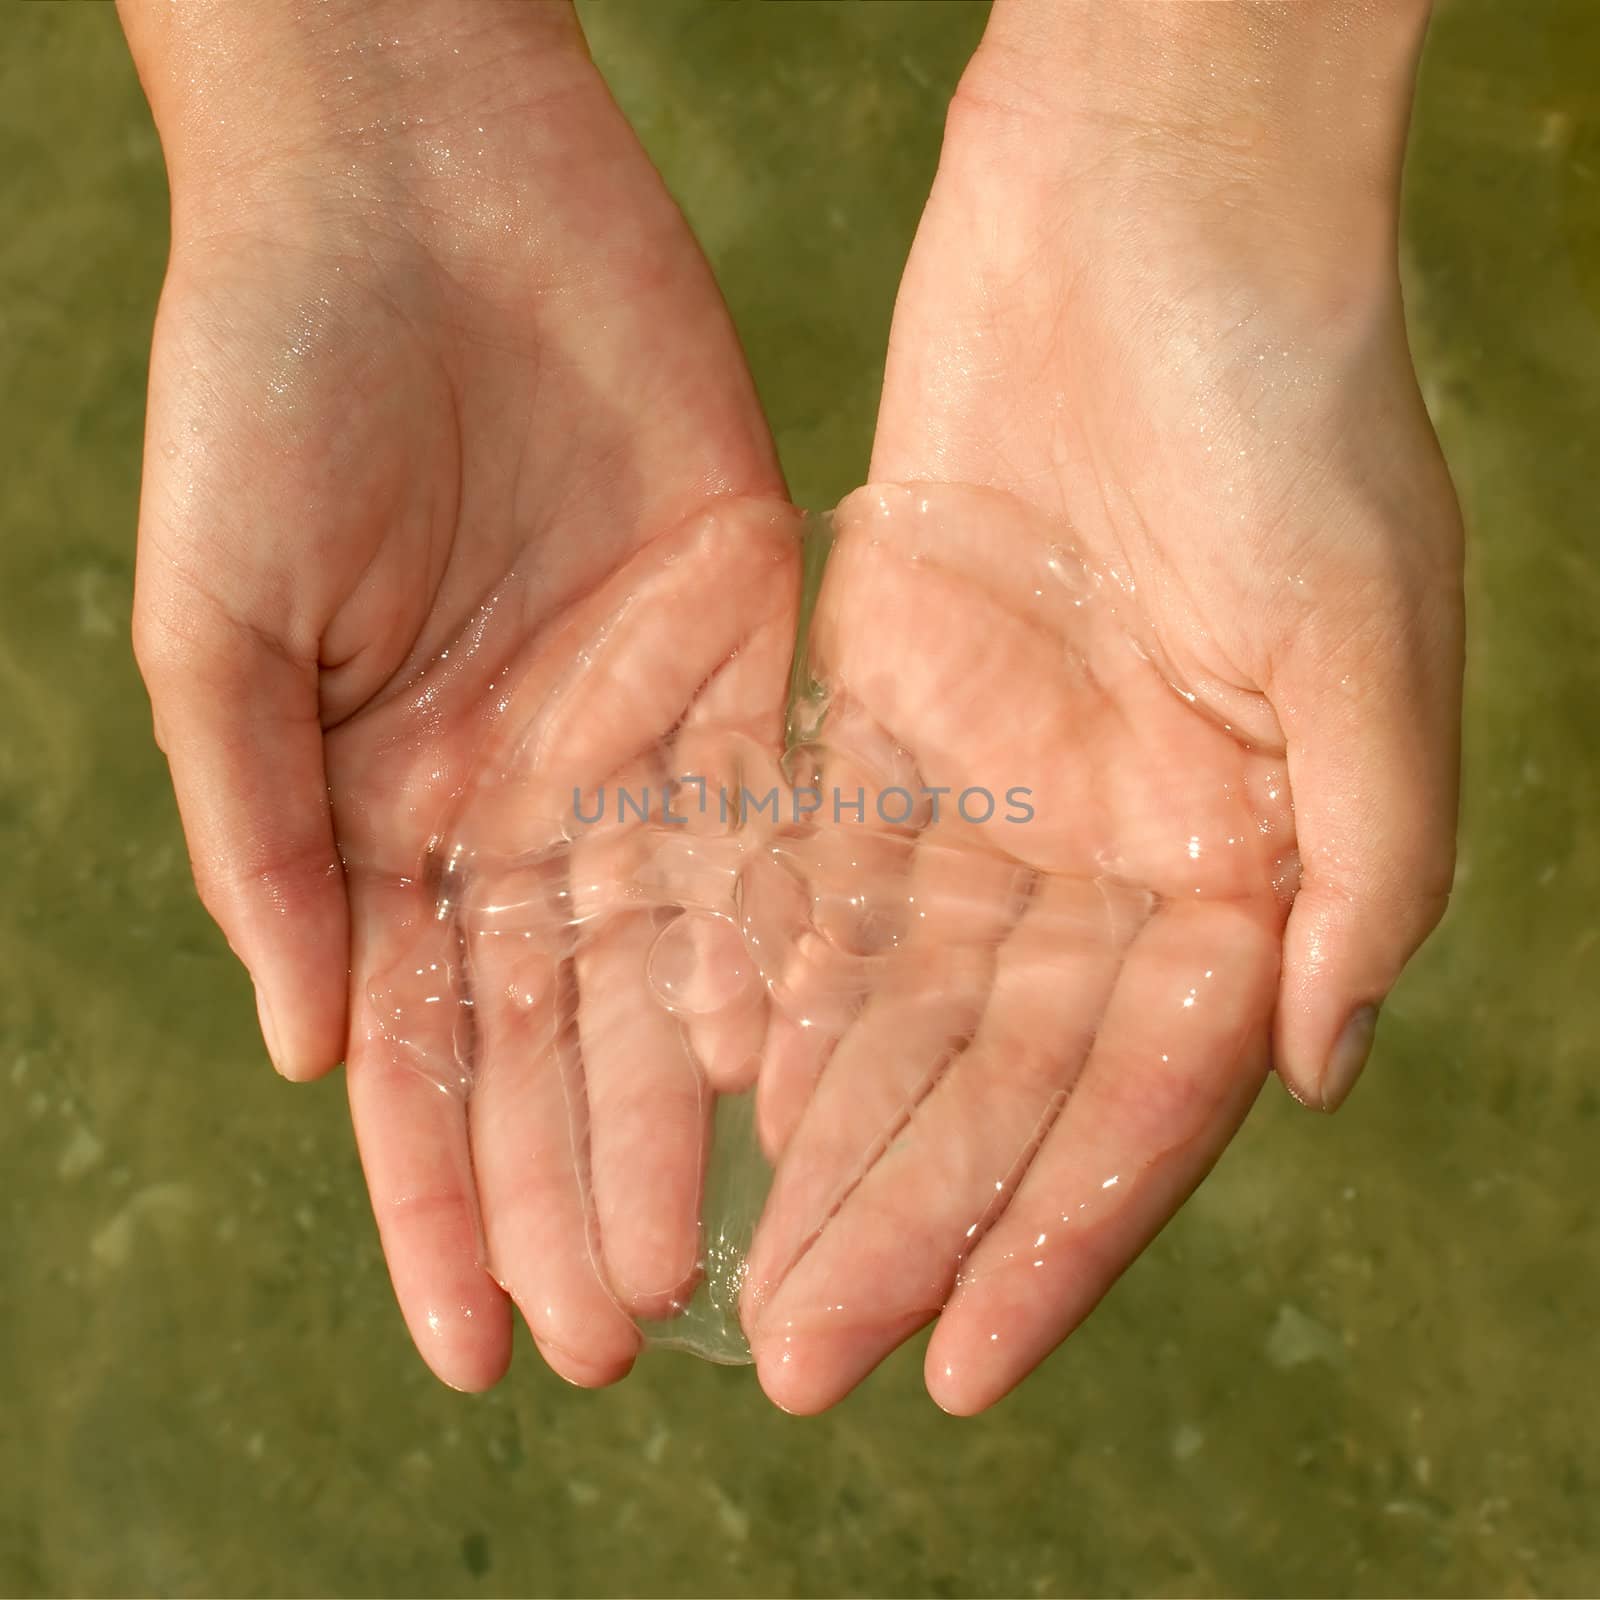 The small translucent jellyfish in women's hands